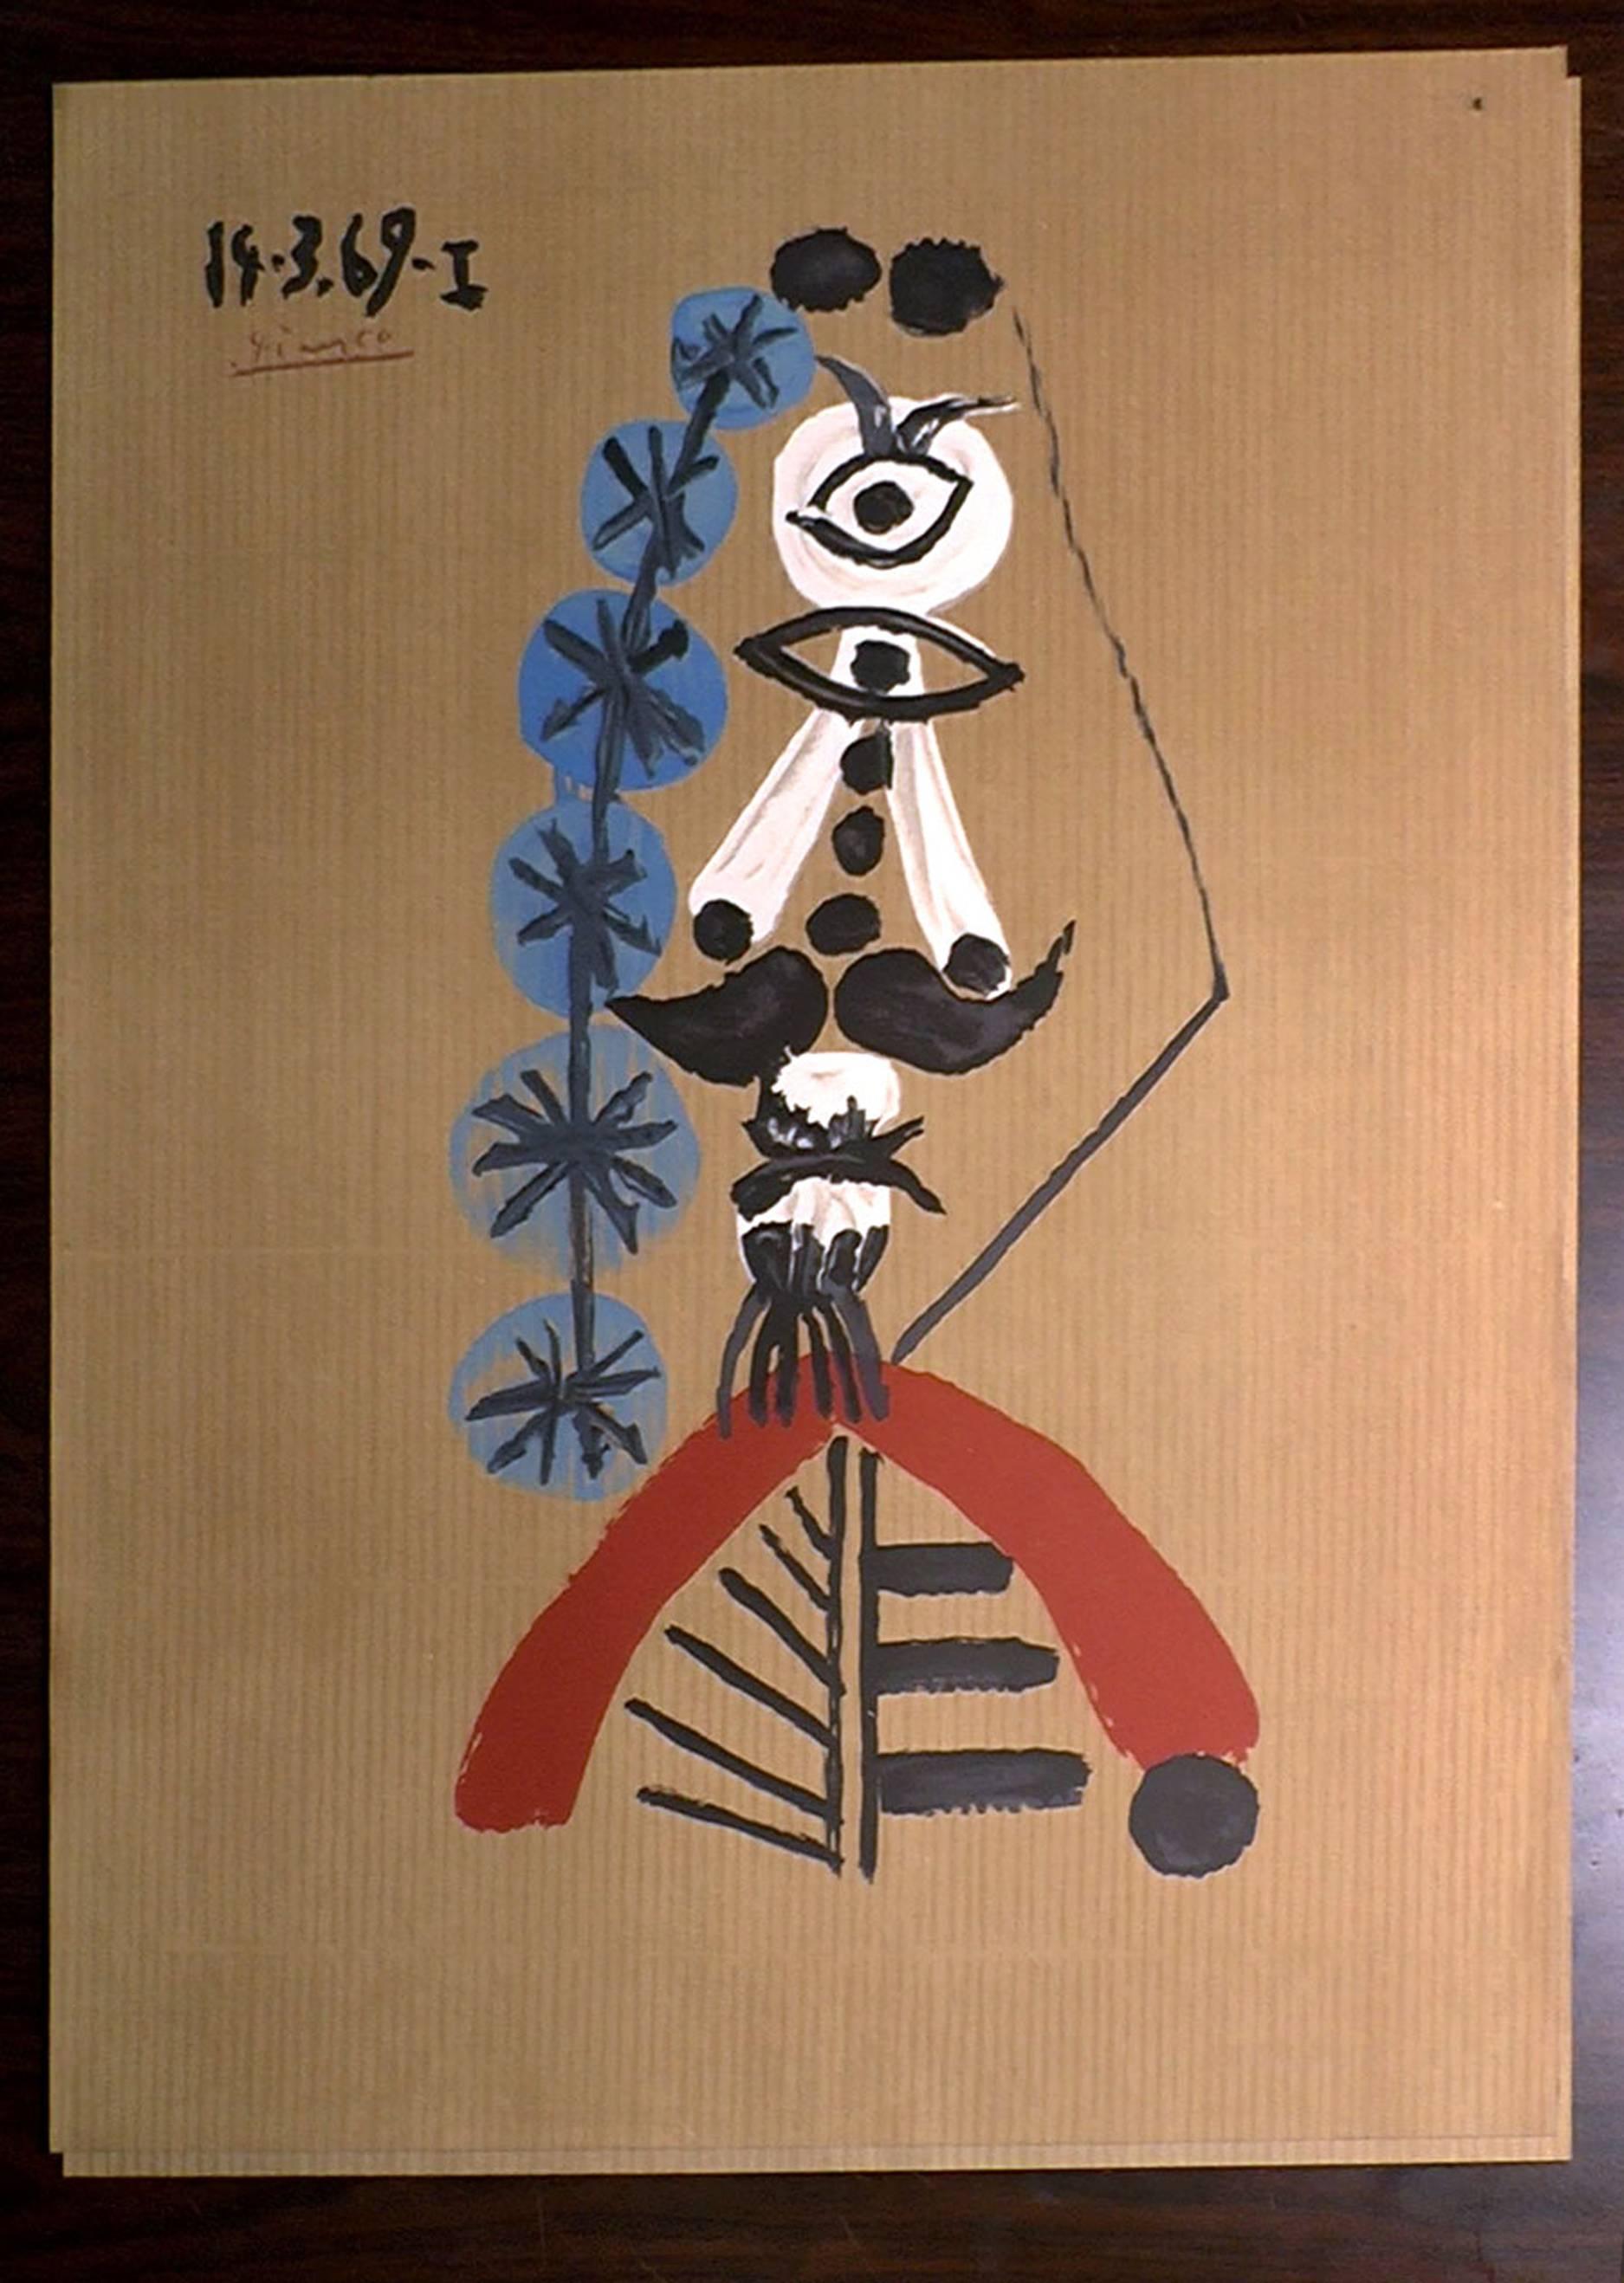 Great and vibrant Picasso's signed and dated Portrait imaginaire original lithograph, France, 1969
Made in a special and beautiful brown color paper
Lithographe maker : Salinas
Paper : Papier Vélin d'Arches..
    